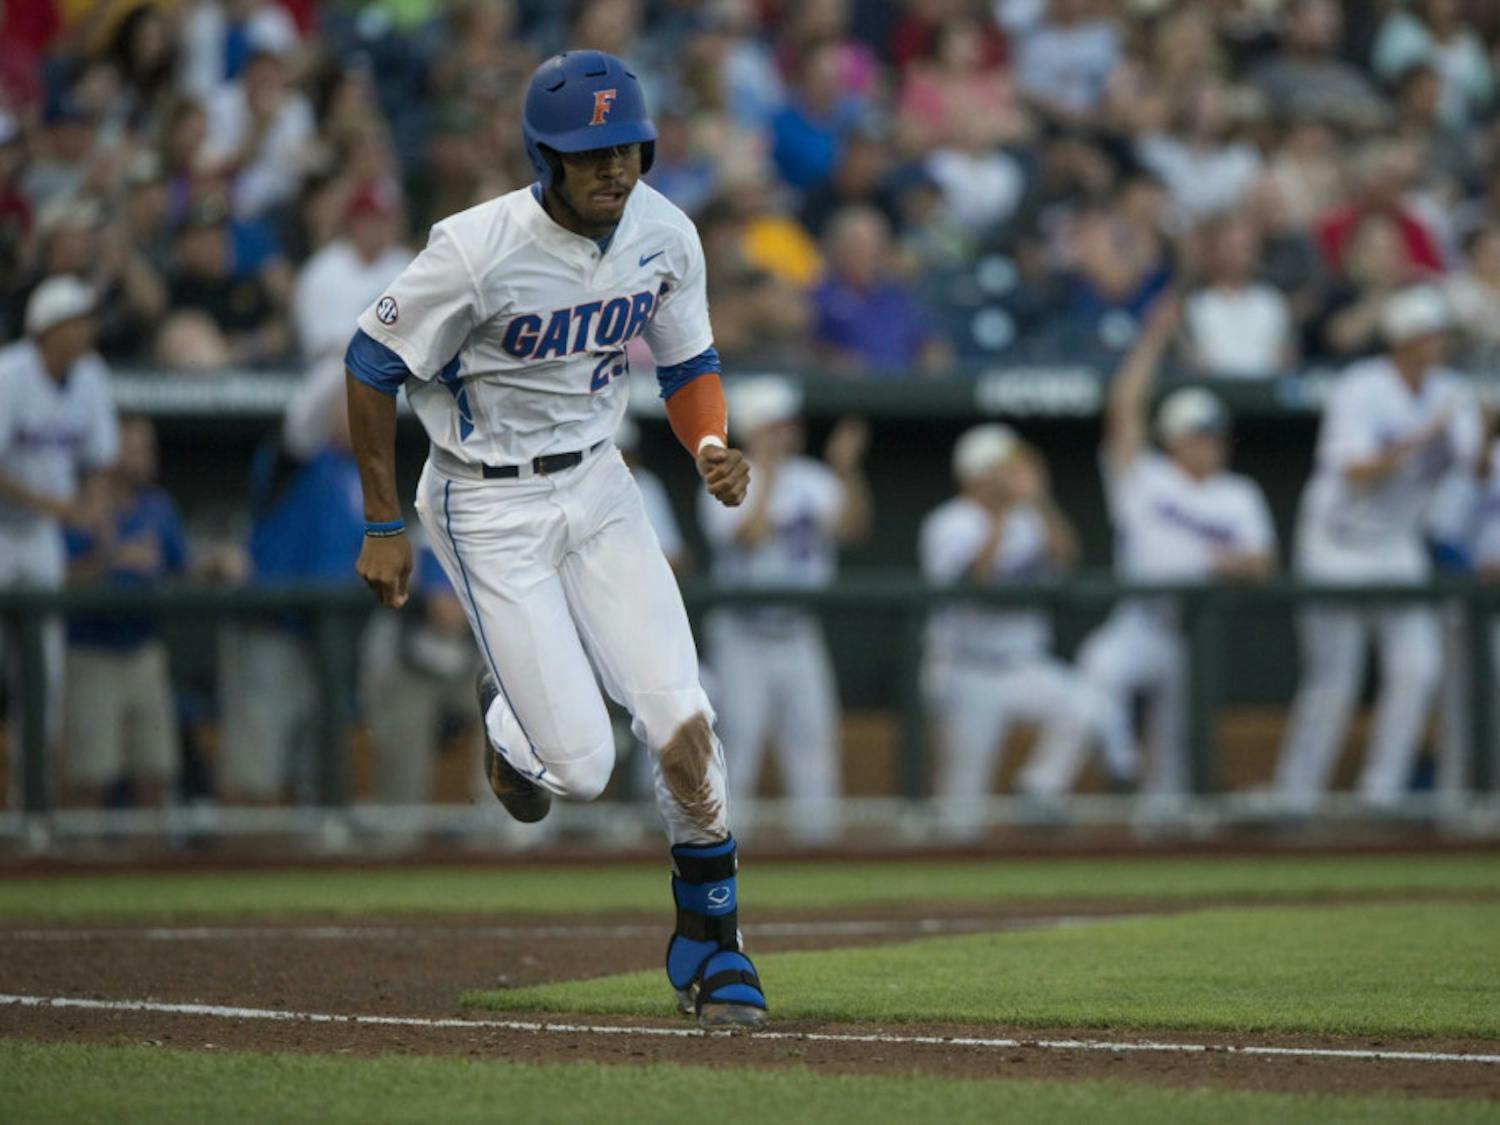 Florida's Buddy Reed runs toward first base during the Gators' 15-3 victory against Miami in the NCAA Men's College World Series on Saturday, June 13, 2015 at TD Ameritrade Park in Omaha.